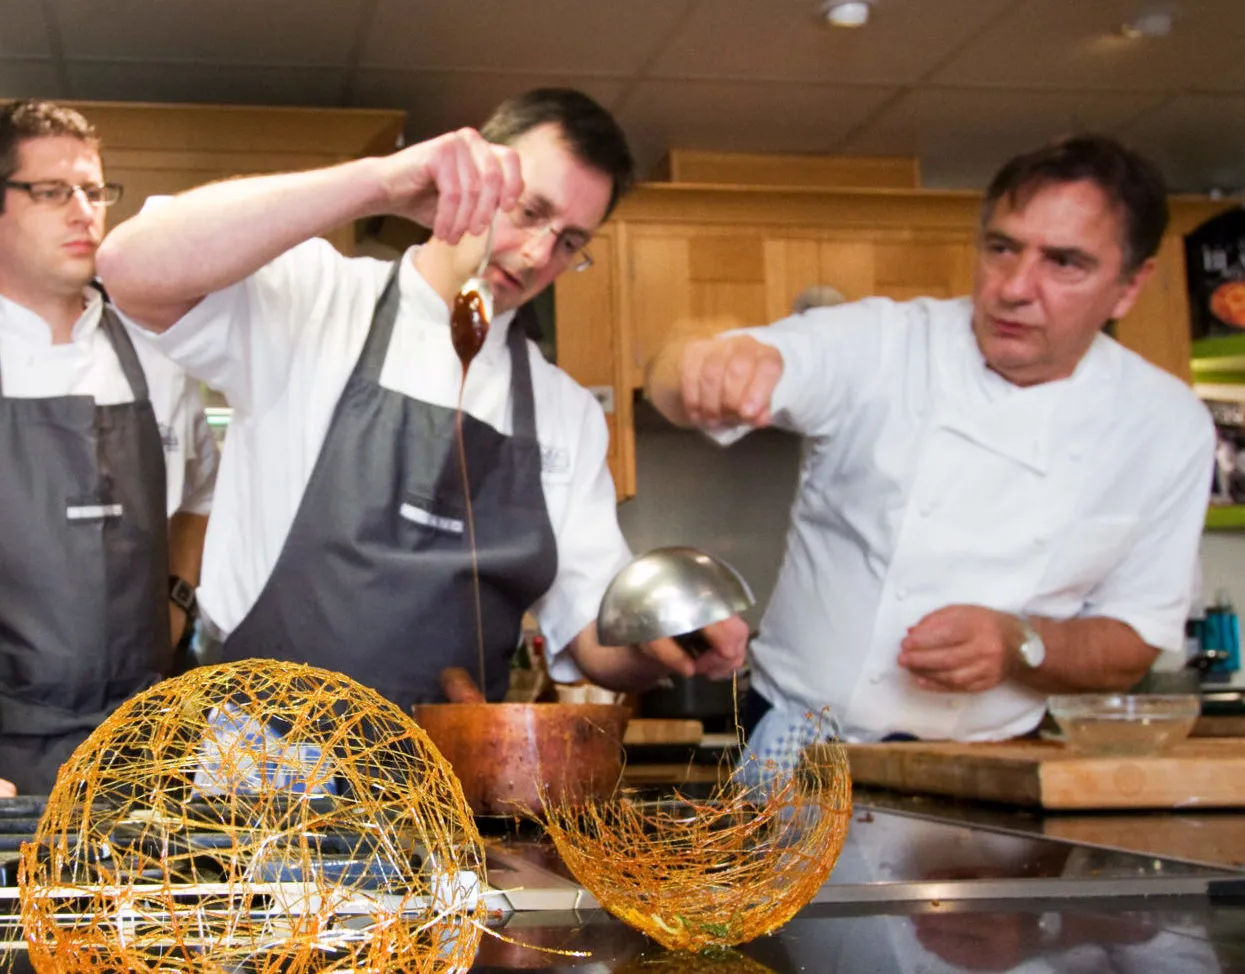 A group of chefs preparing food in a kitchen